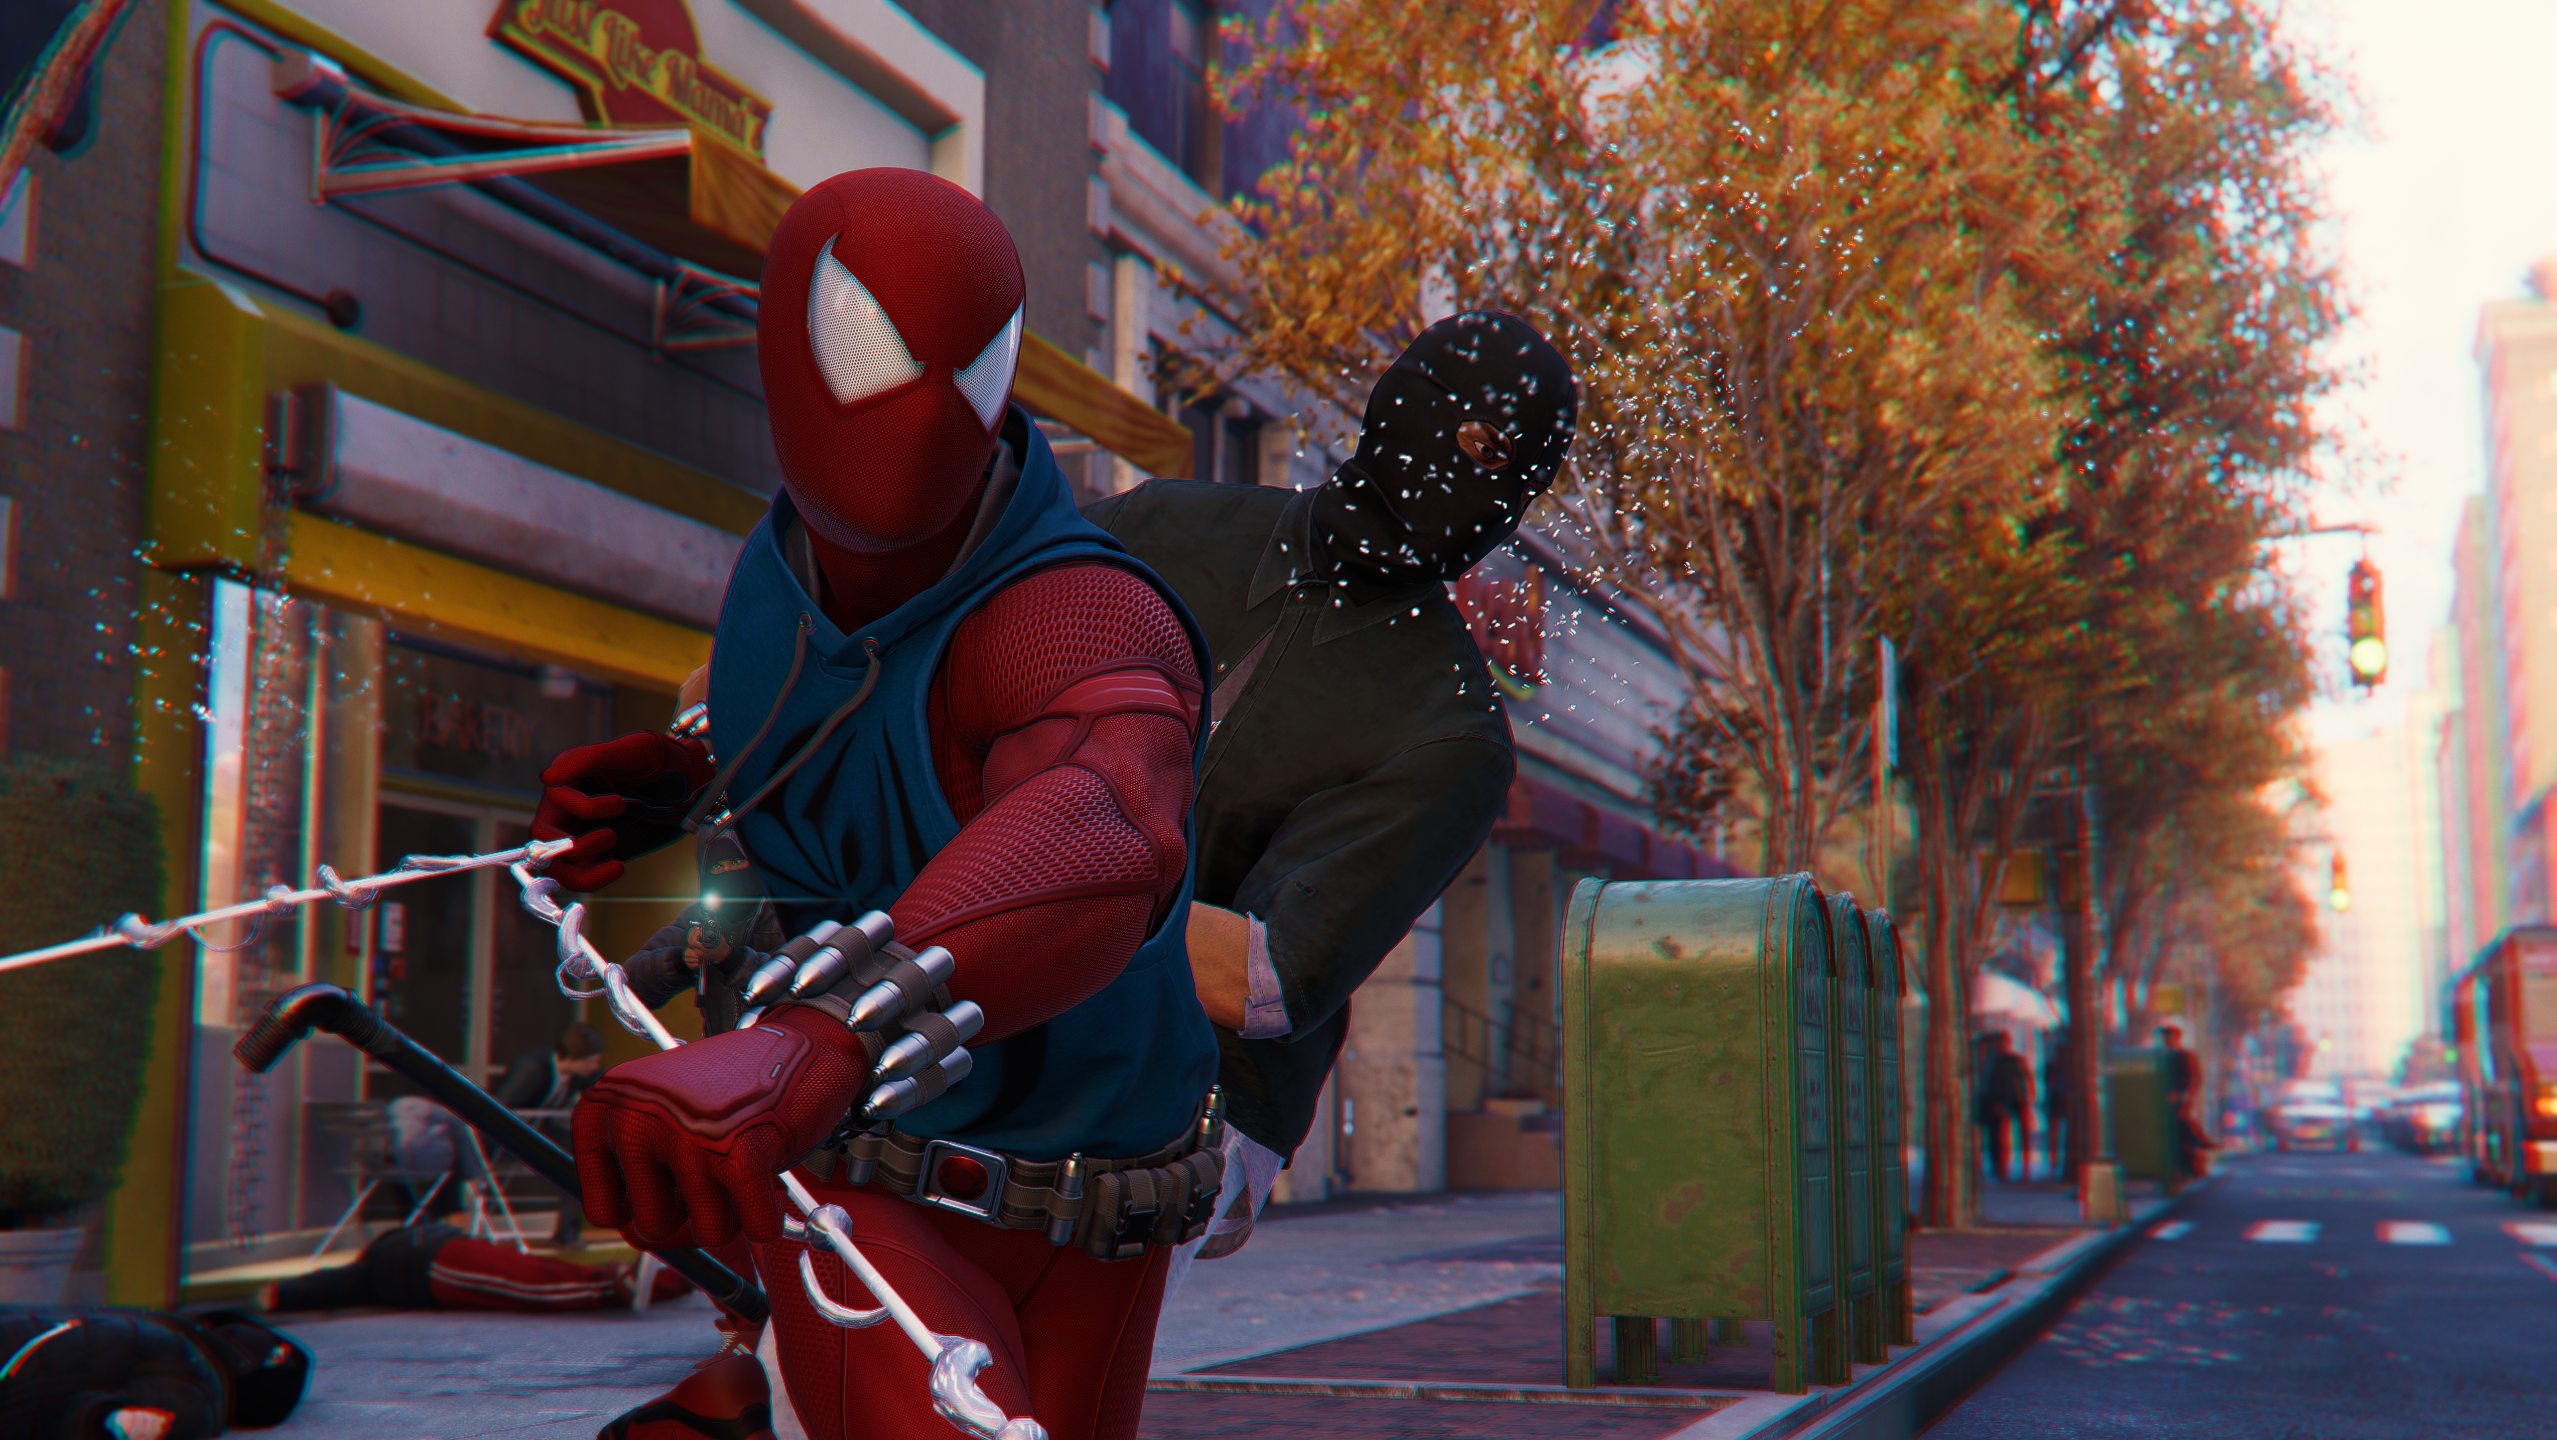 Spider-Man (Yuri Lowenthal) puts an end to the criminal ambitions of some small-time thugs in Marvel's Spider-Man Remastered (2022), Insomniac Games